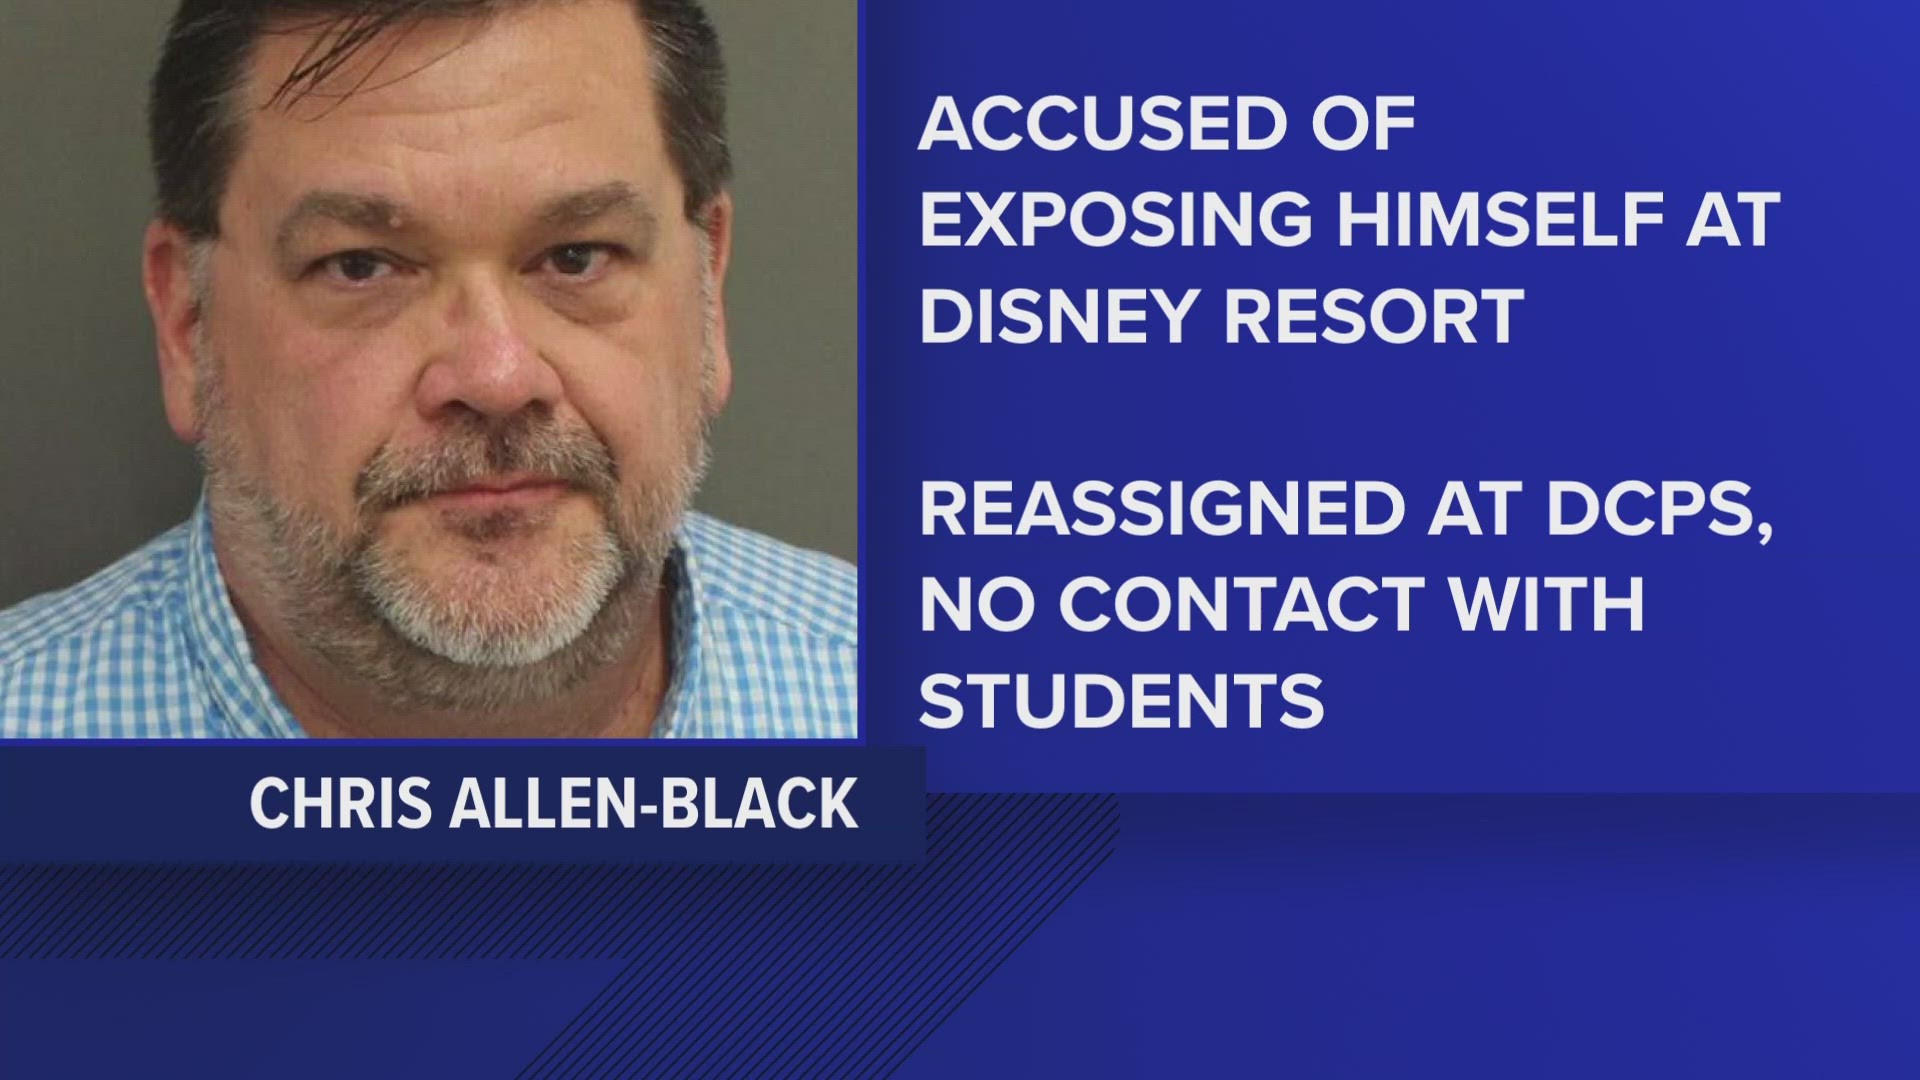 Witnesses told police they saw math teacher Chris Allen-Black naked in the window performing sexual acts.